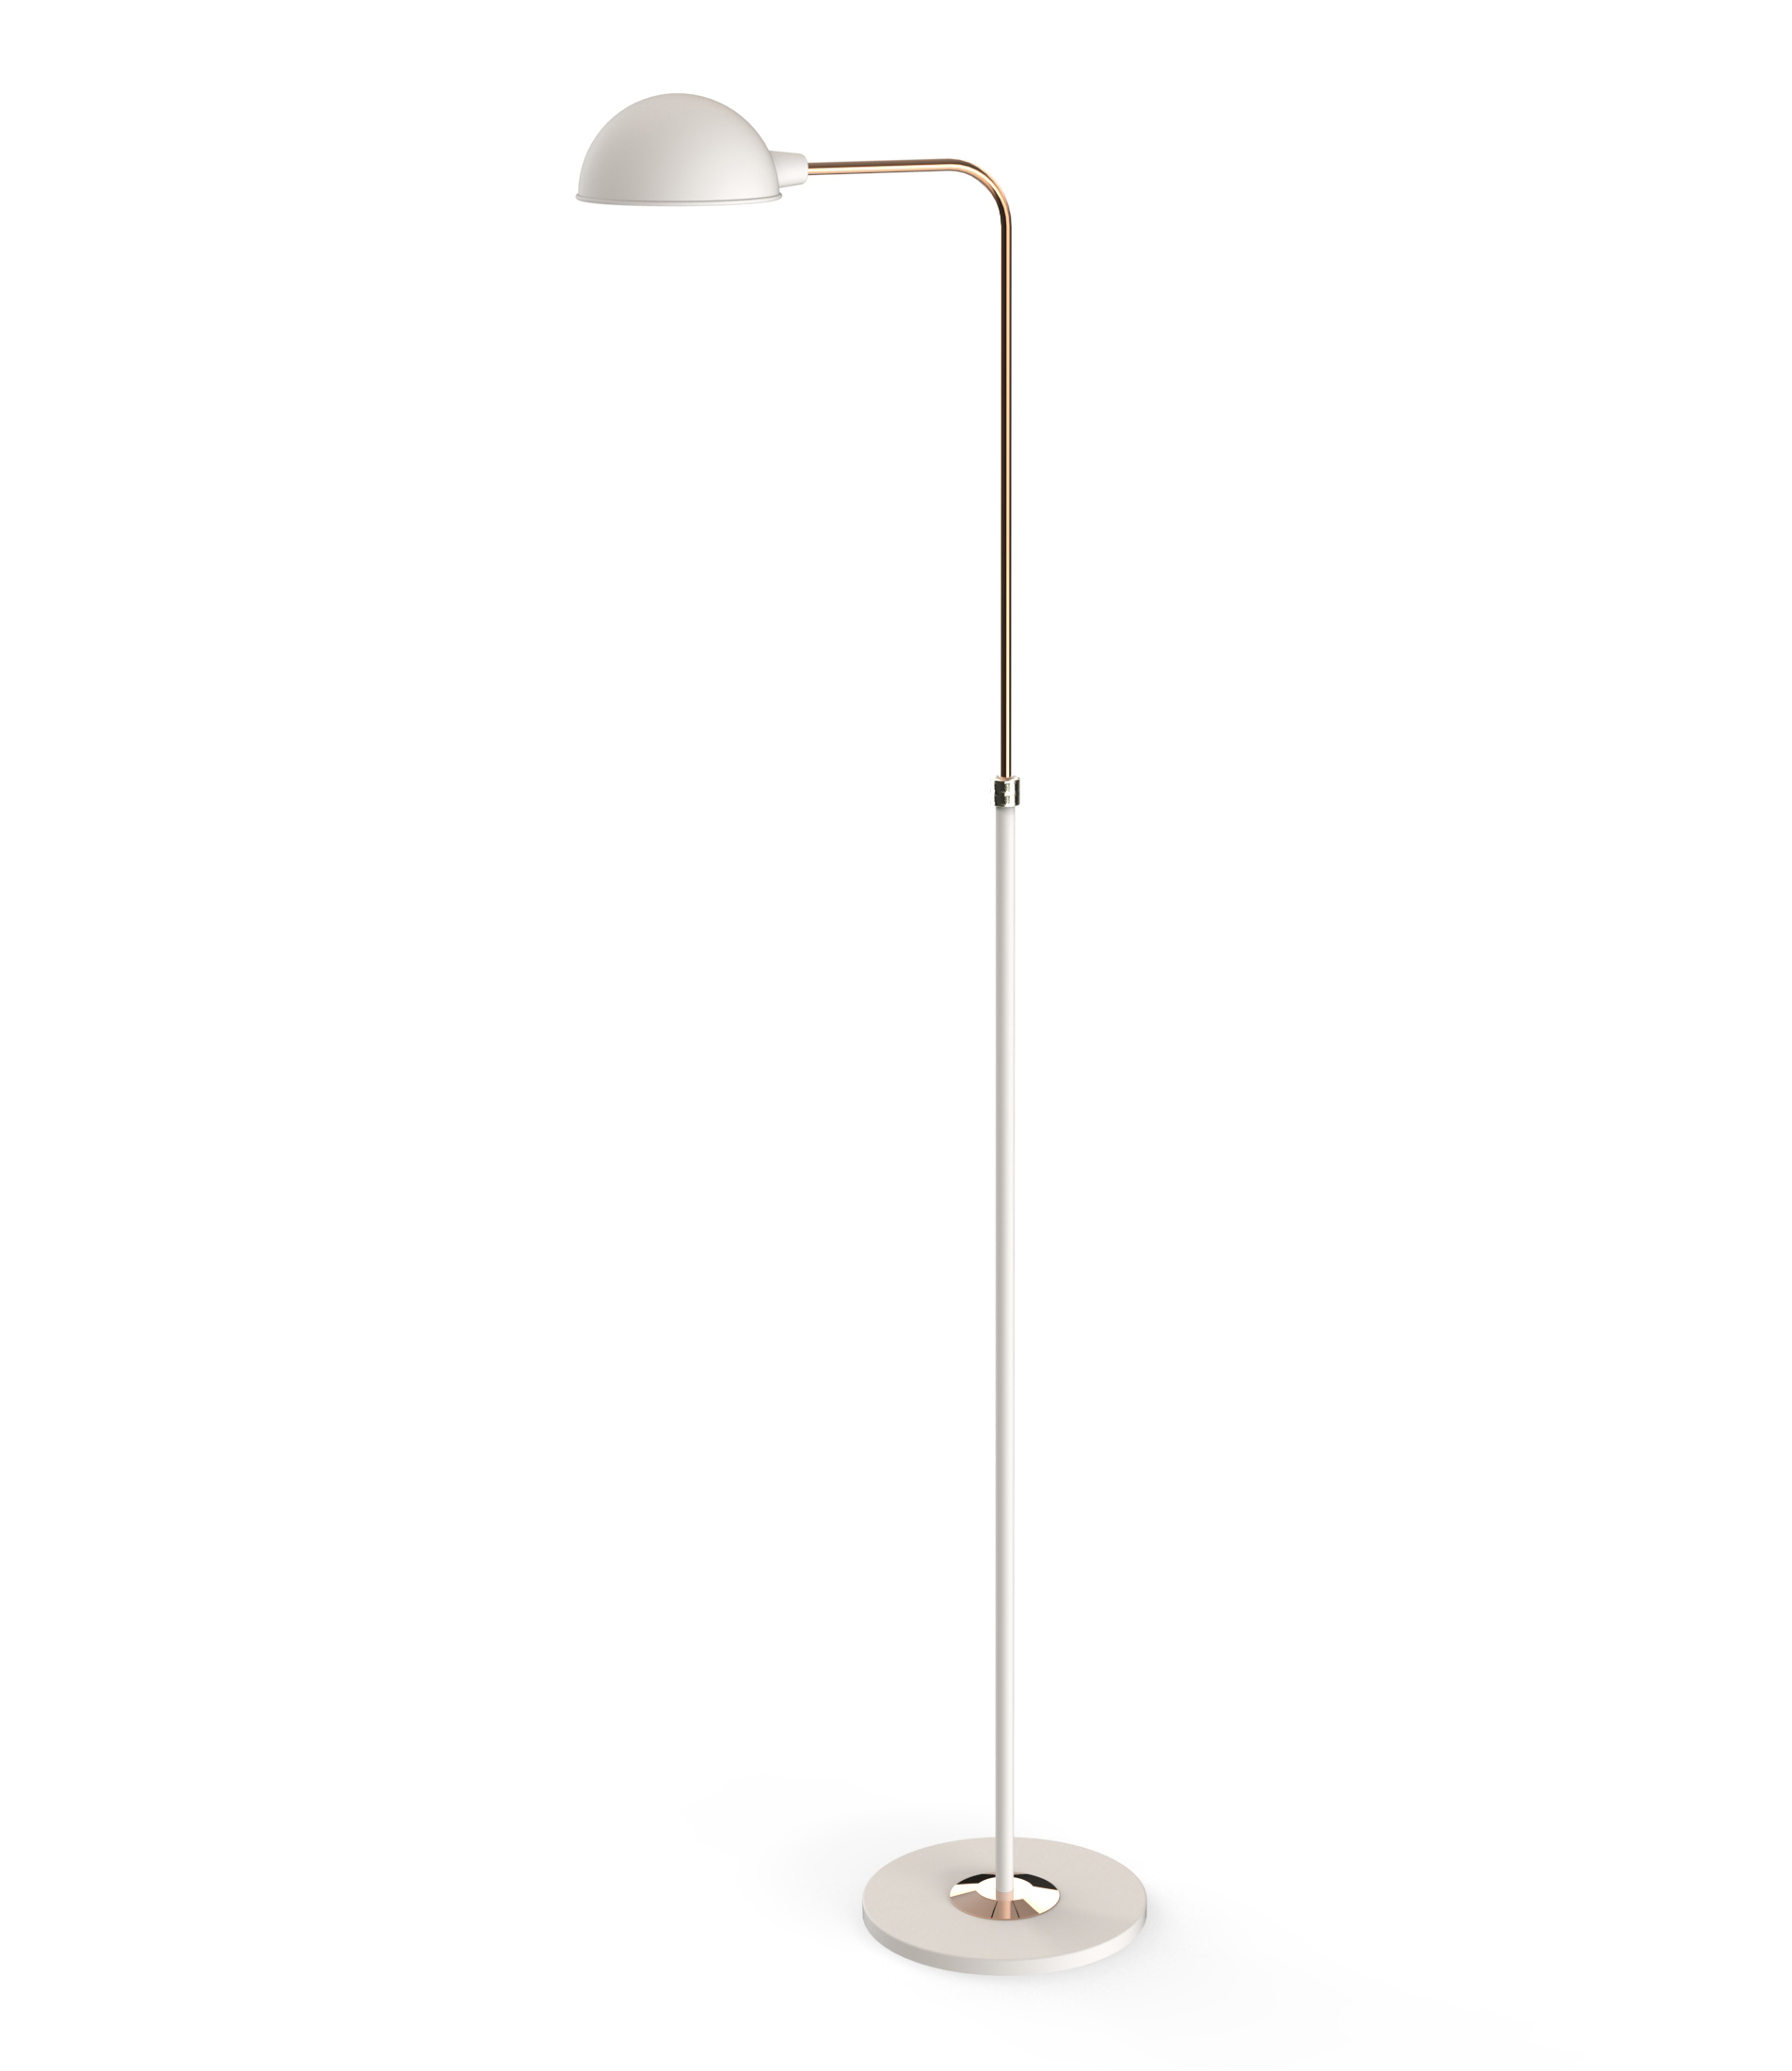 Lamp Lighting Bright Floor Lamps Pixball Too Floors With with dimensions 1904 X 2200